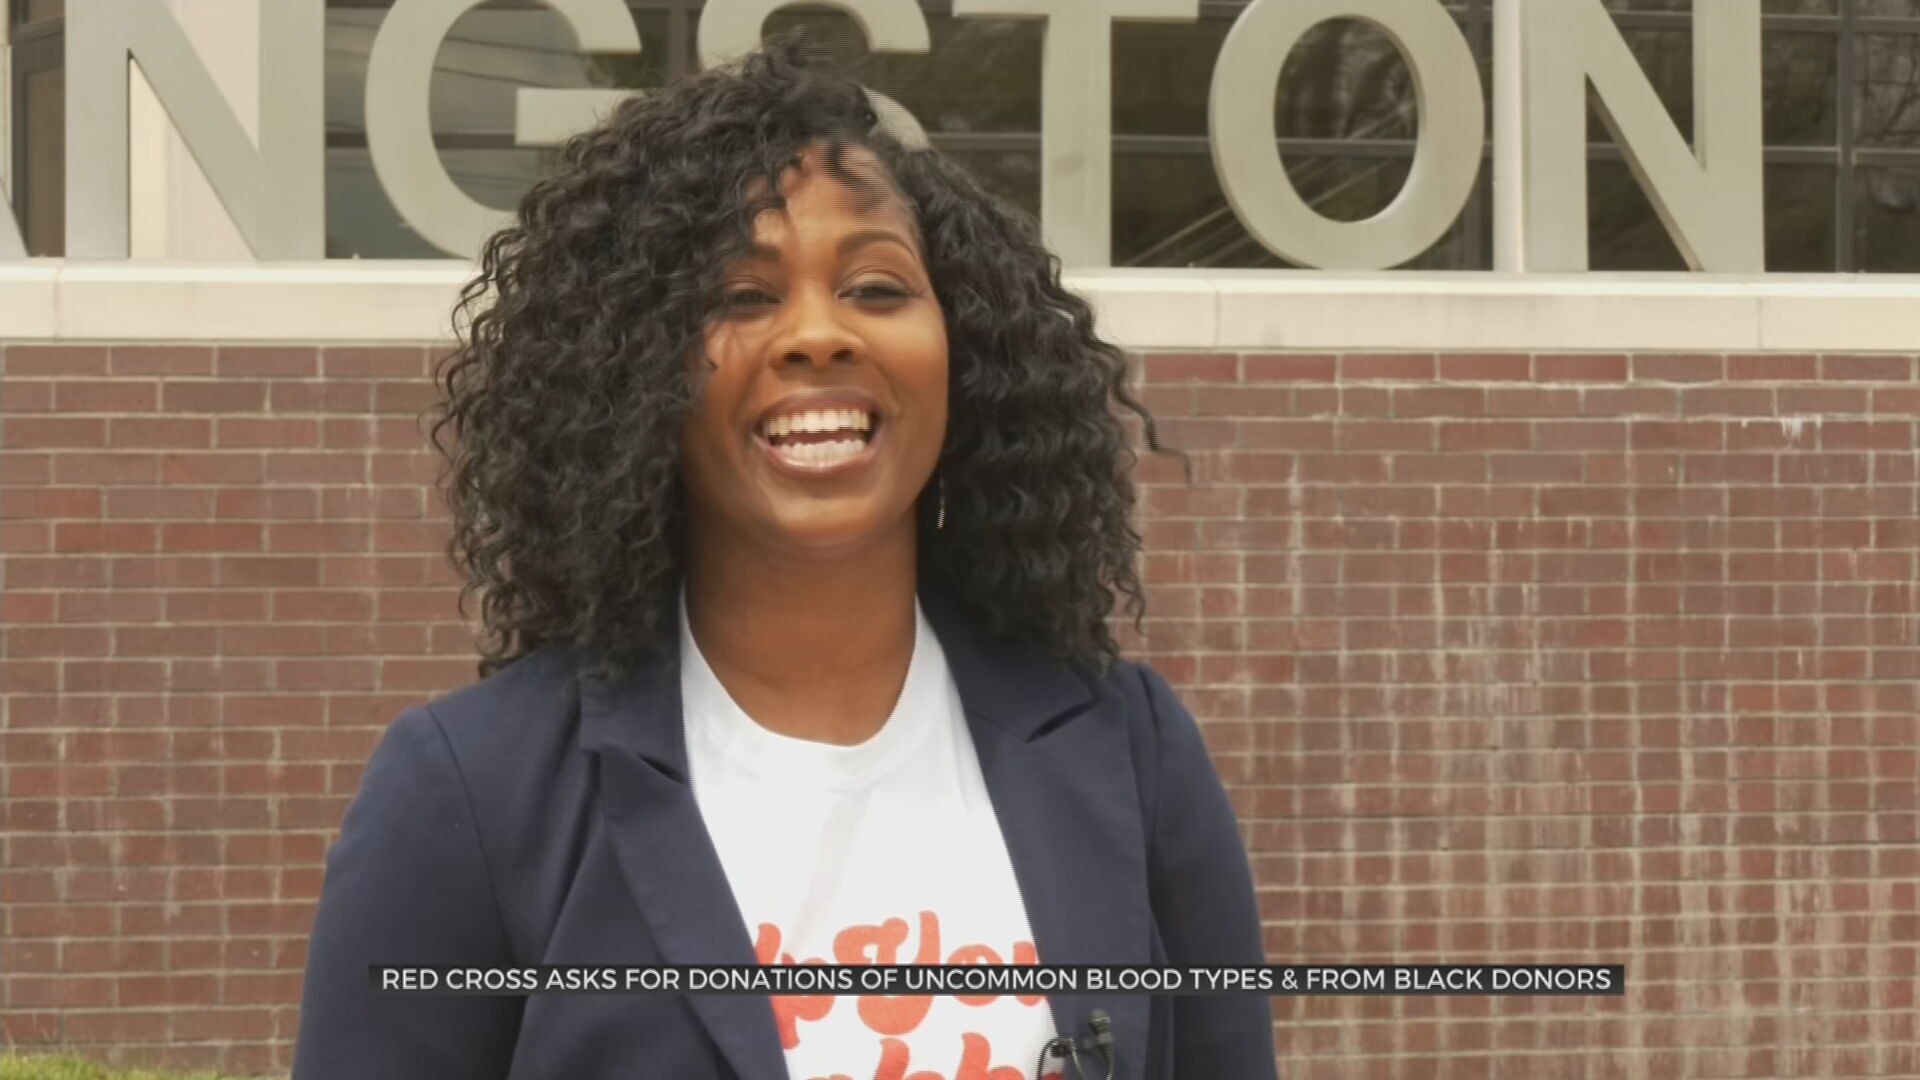 Red Cross In Desperate Need Of ‘Life-Saving’ Blood Donations From Black Donors